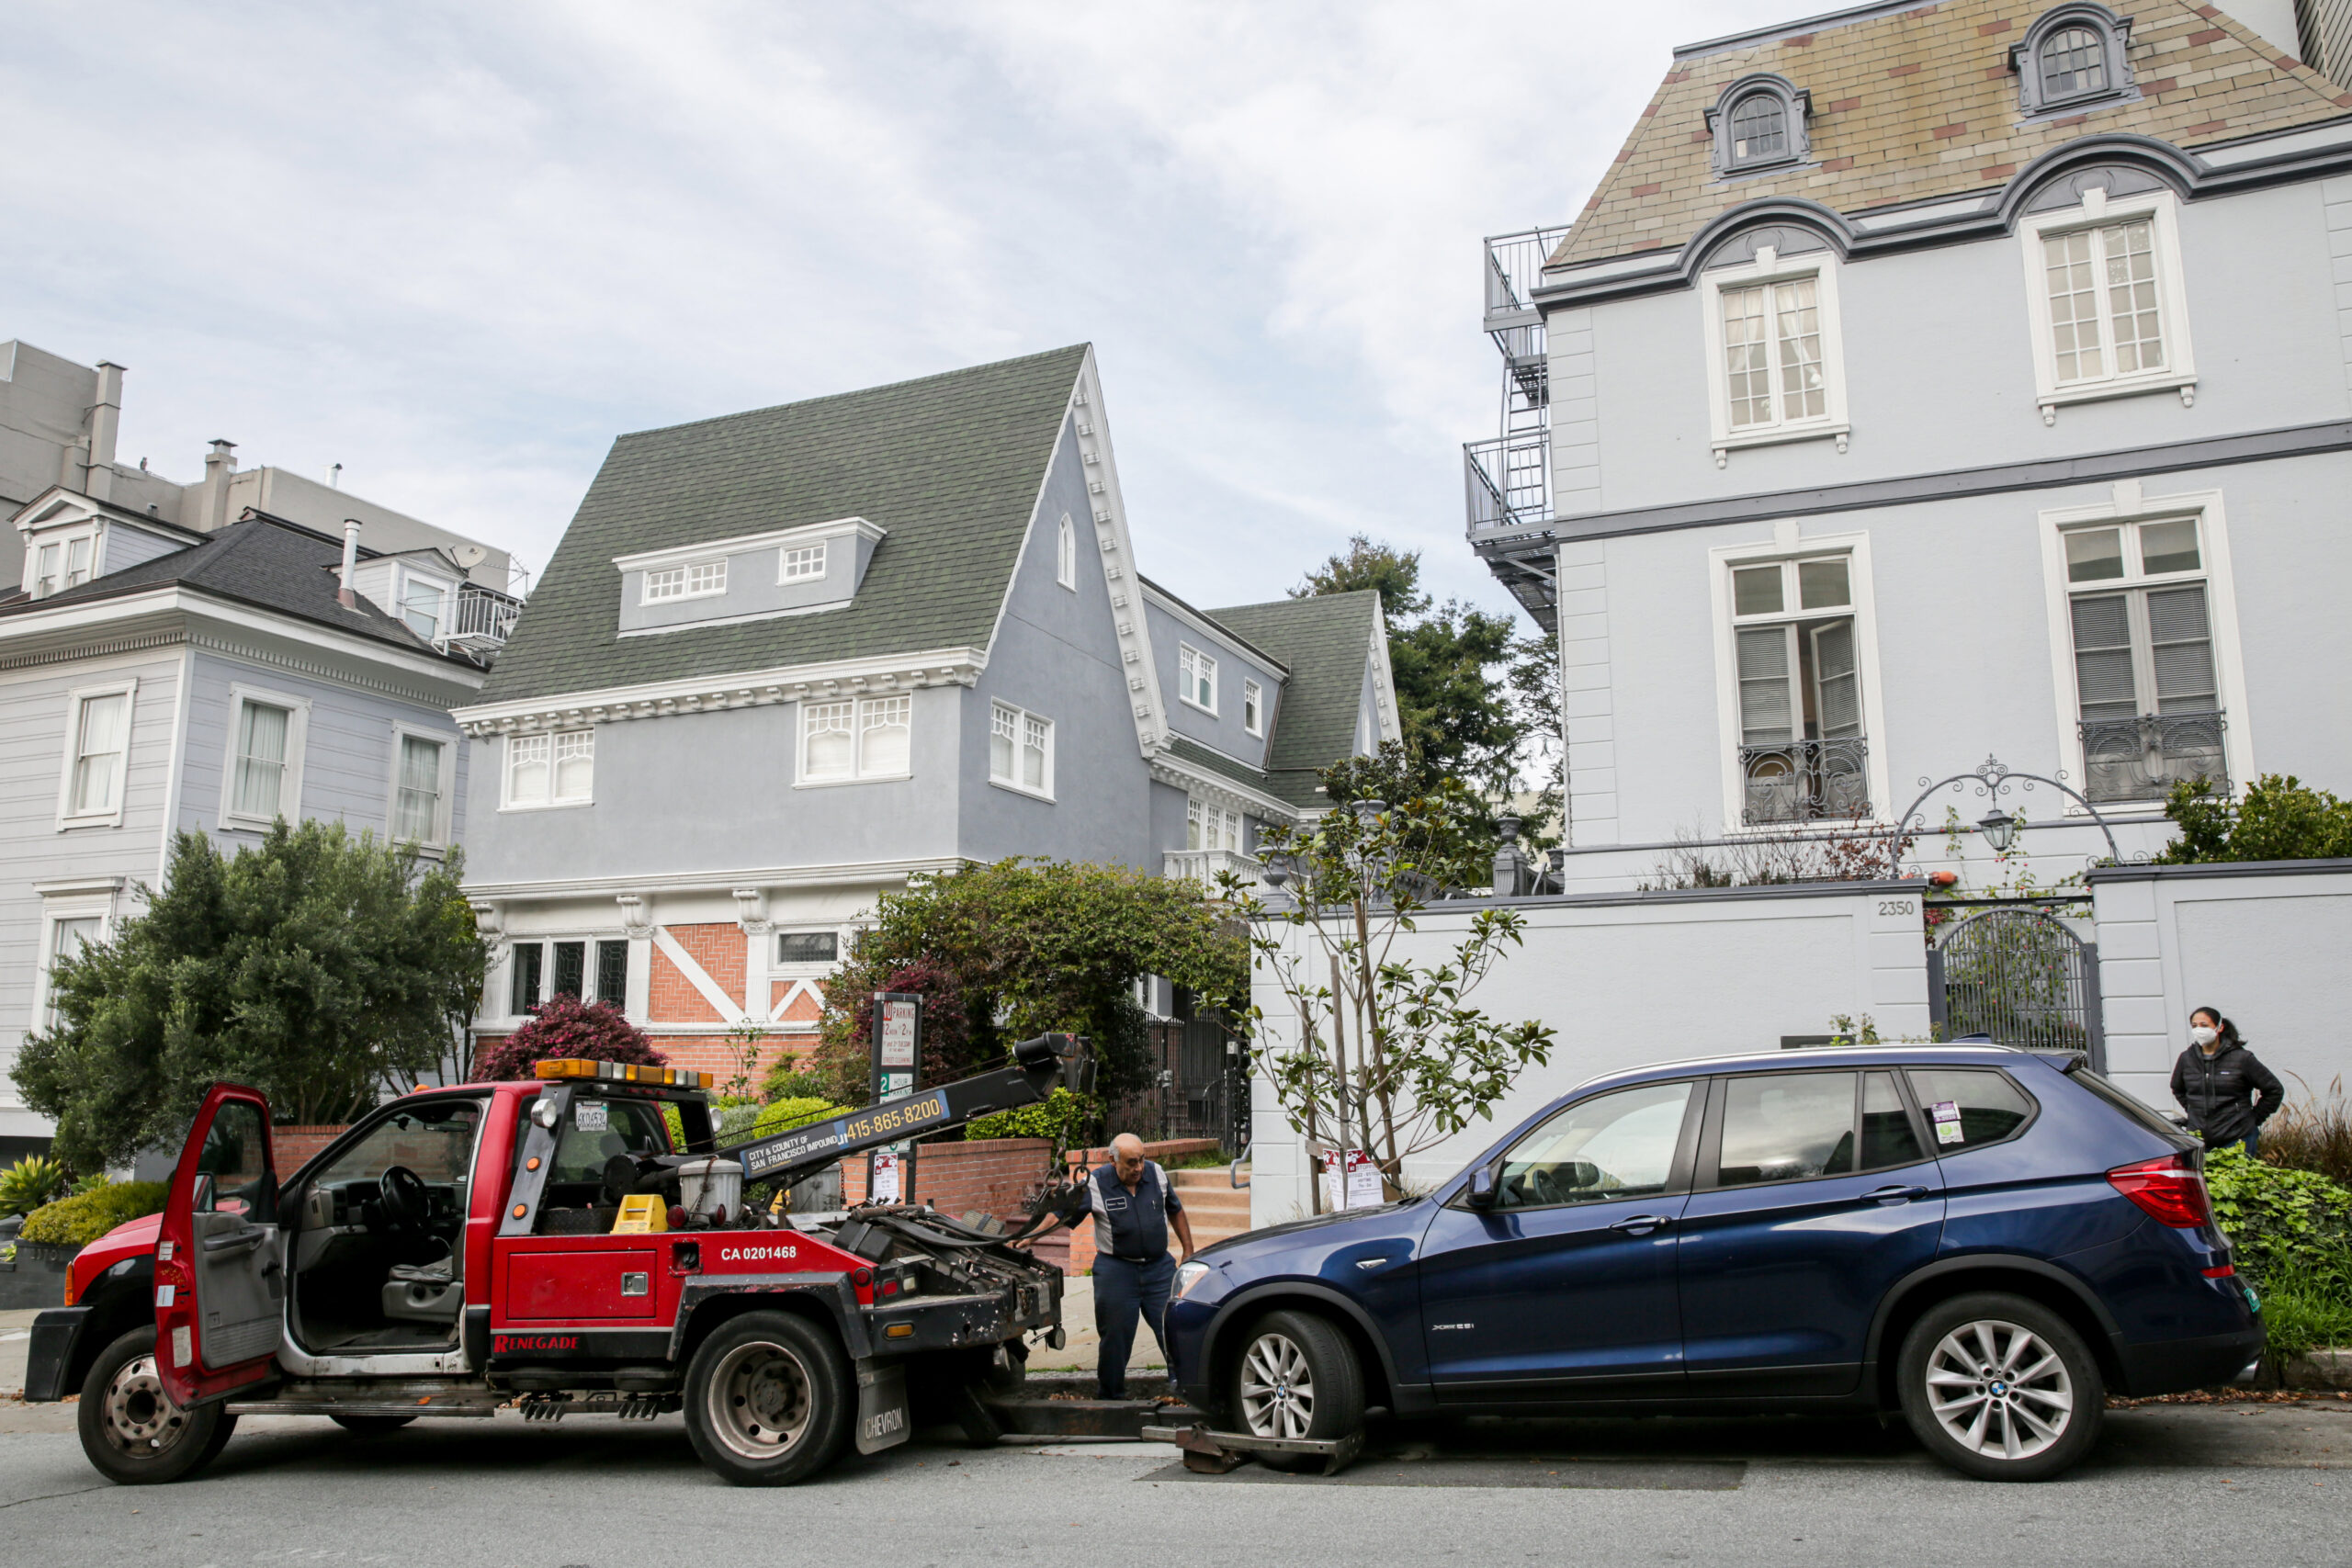 San Francisco Accuses Car Towing Company of Fraudulently Towing Cars of ‘Vulnerable Individuals’